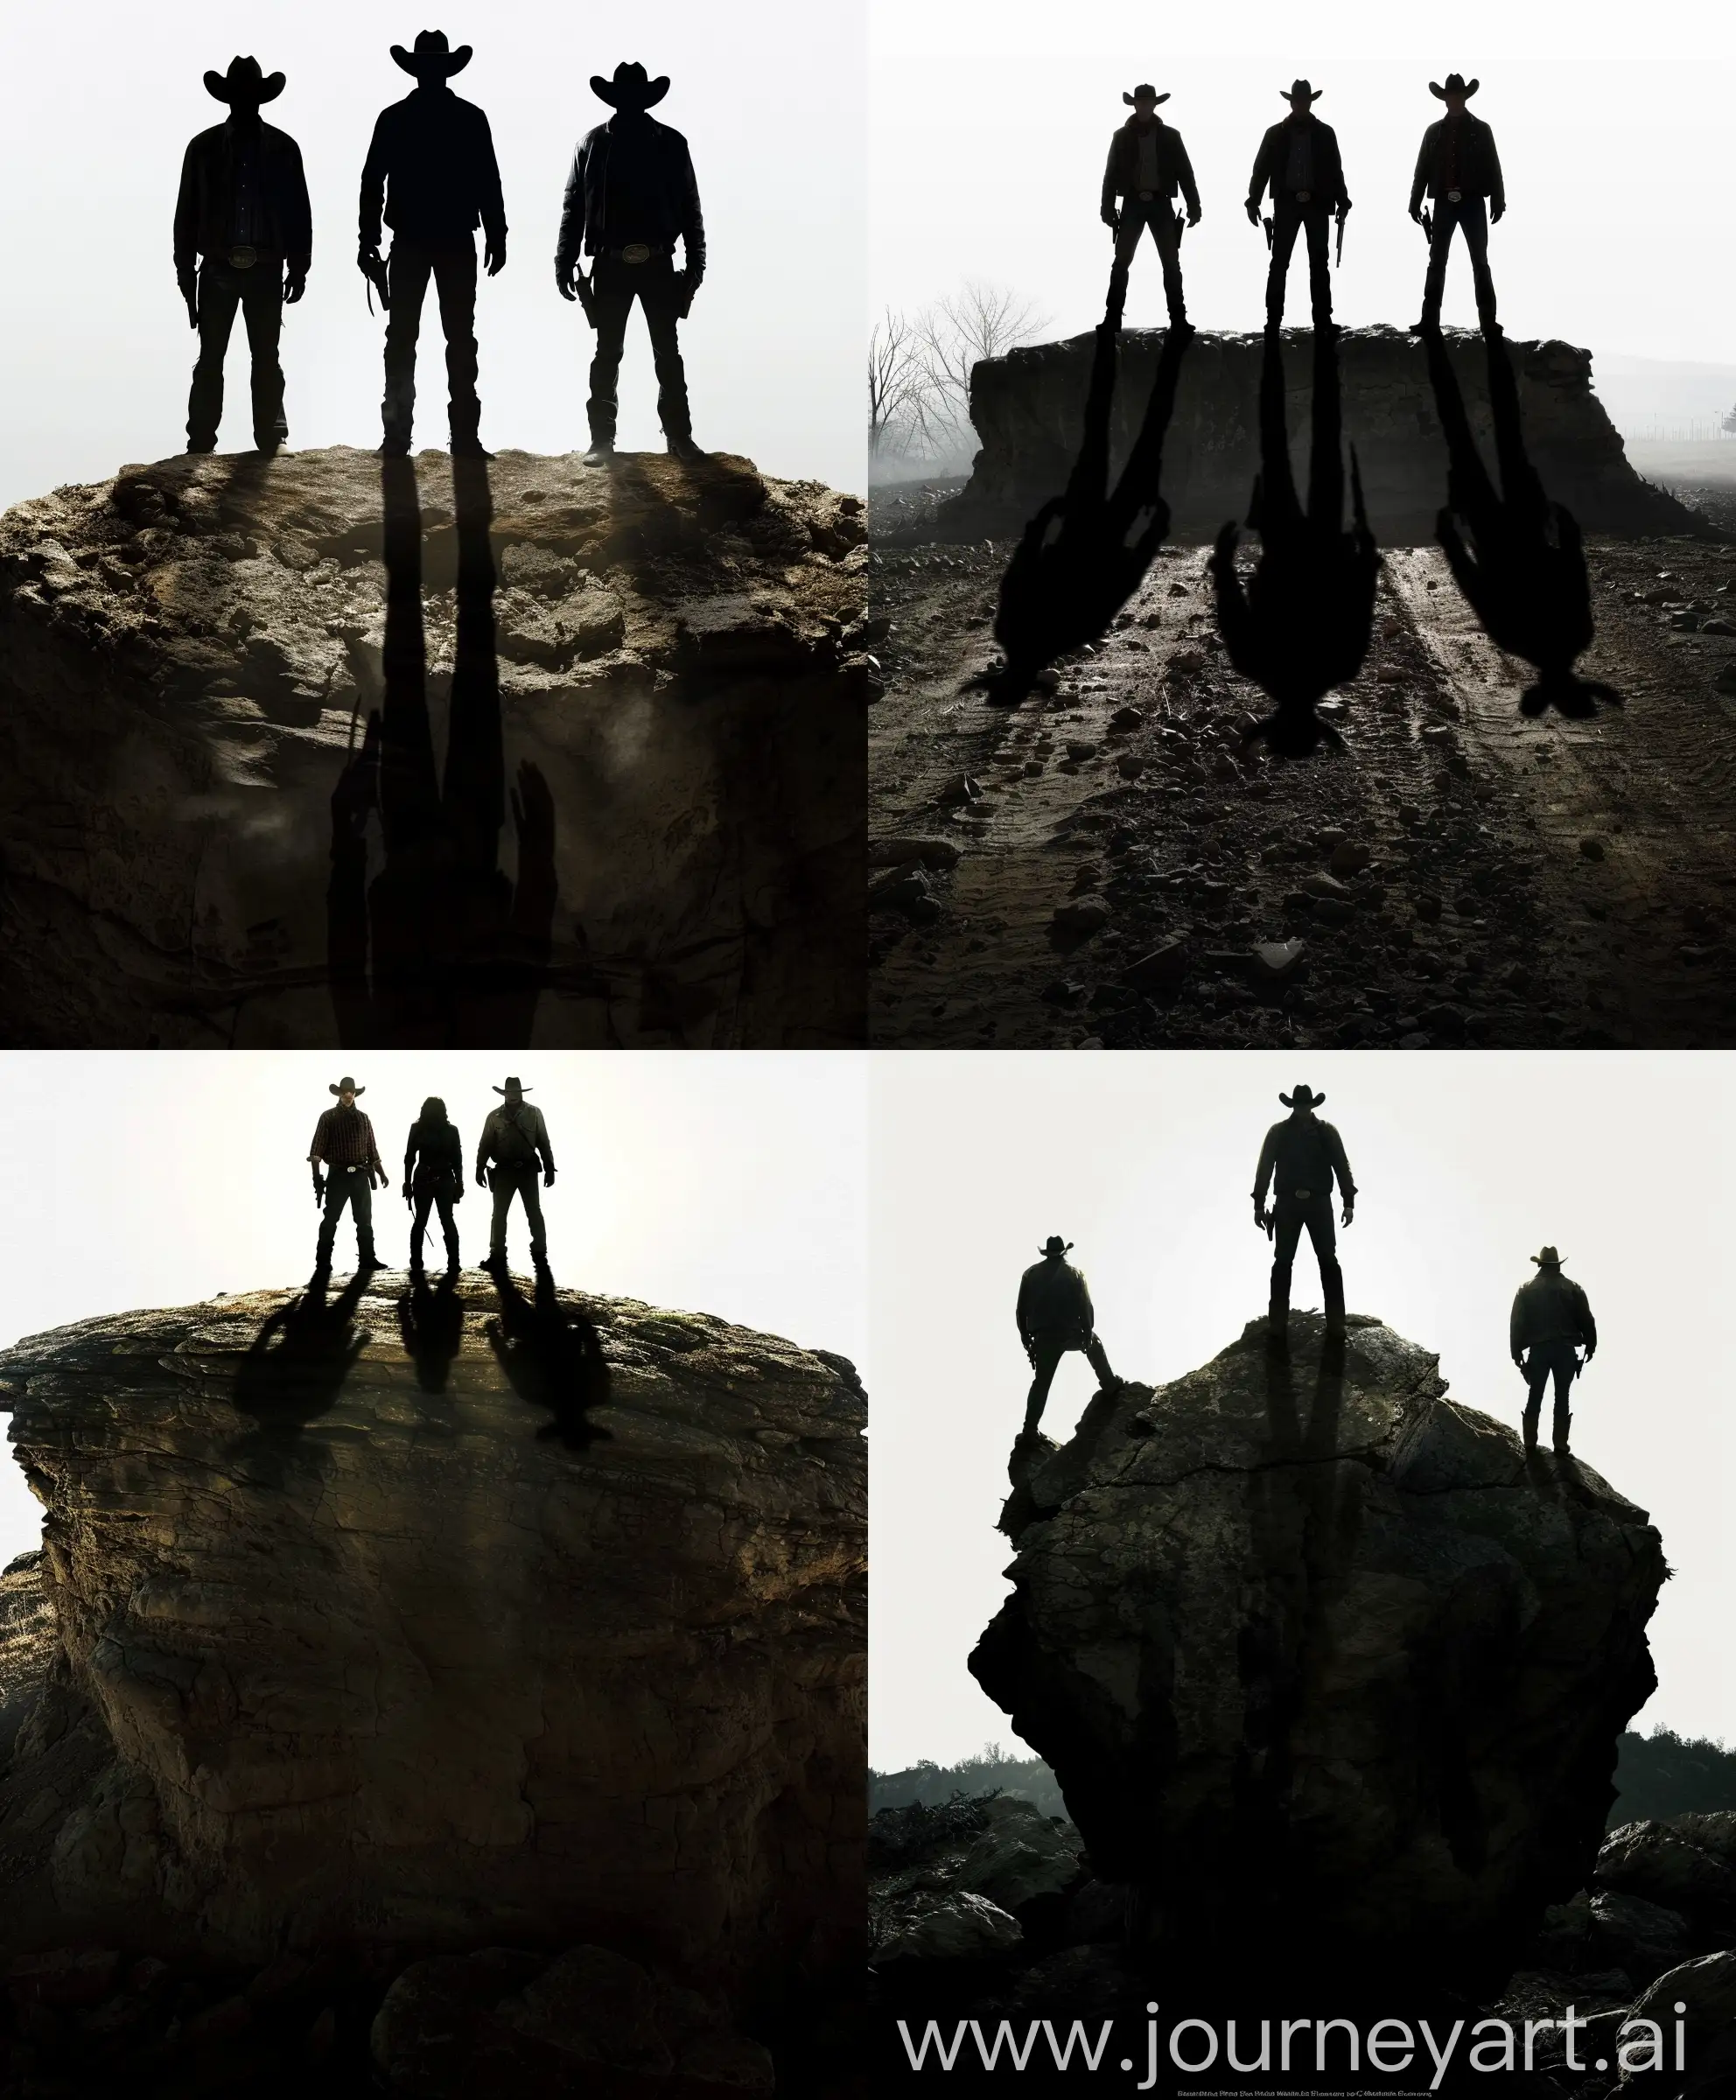 The shadow of 3 cowboys atop a rock, silhouettes, white background --sref https://i.pinimg.com/564x/9b/bb/0d/9bbb0d18e08d6ca087503a2e0f87aad9.jpg  --v 6 --style raw --ar 5:6